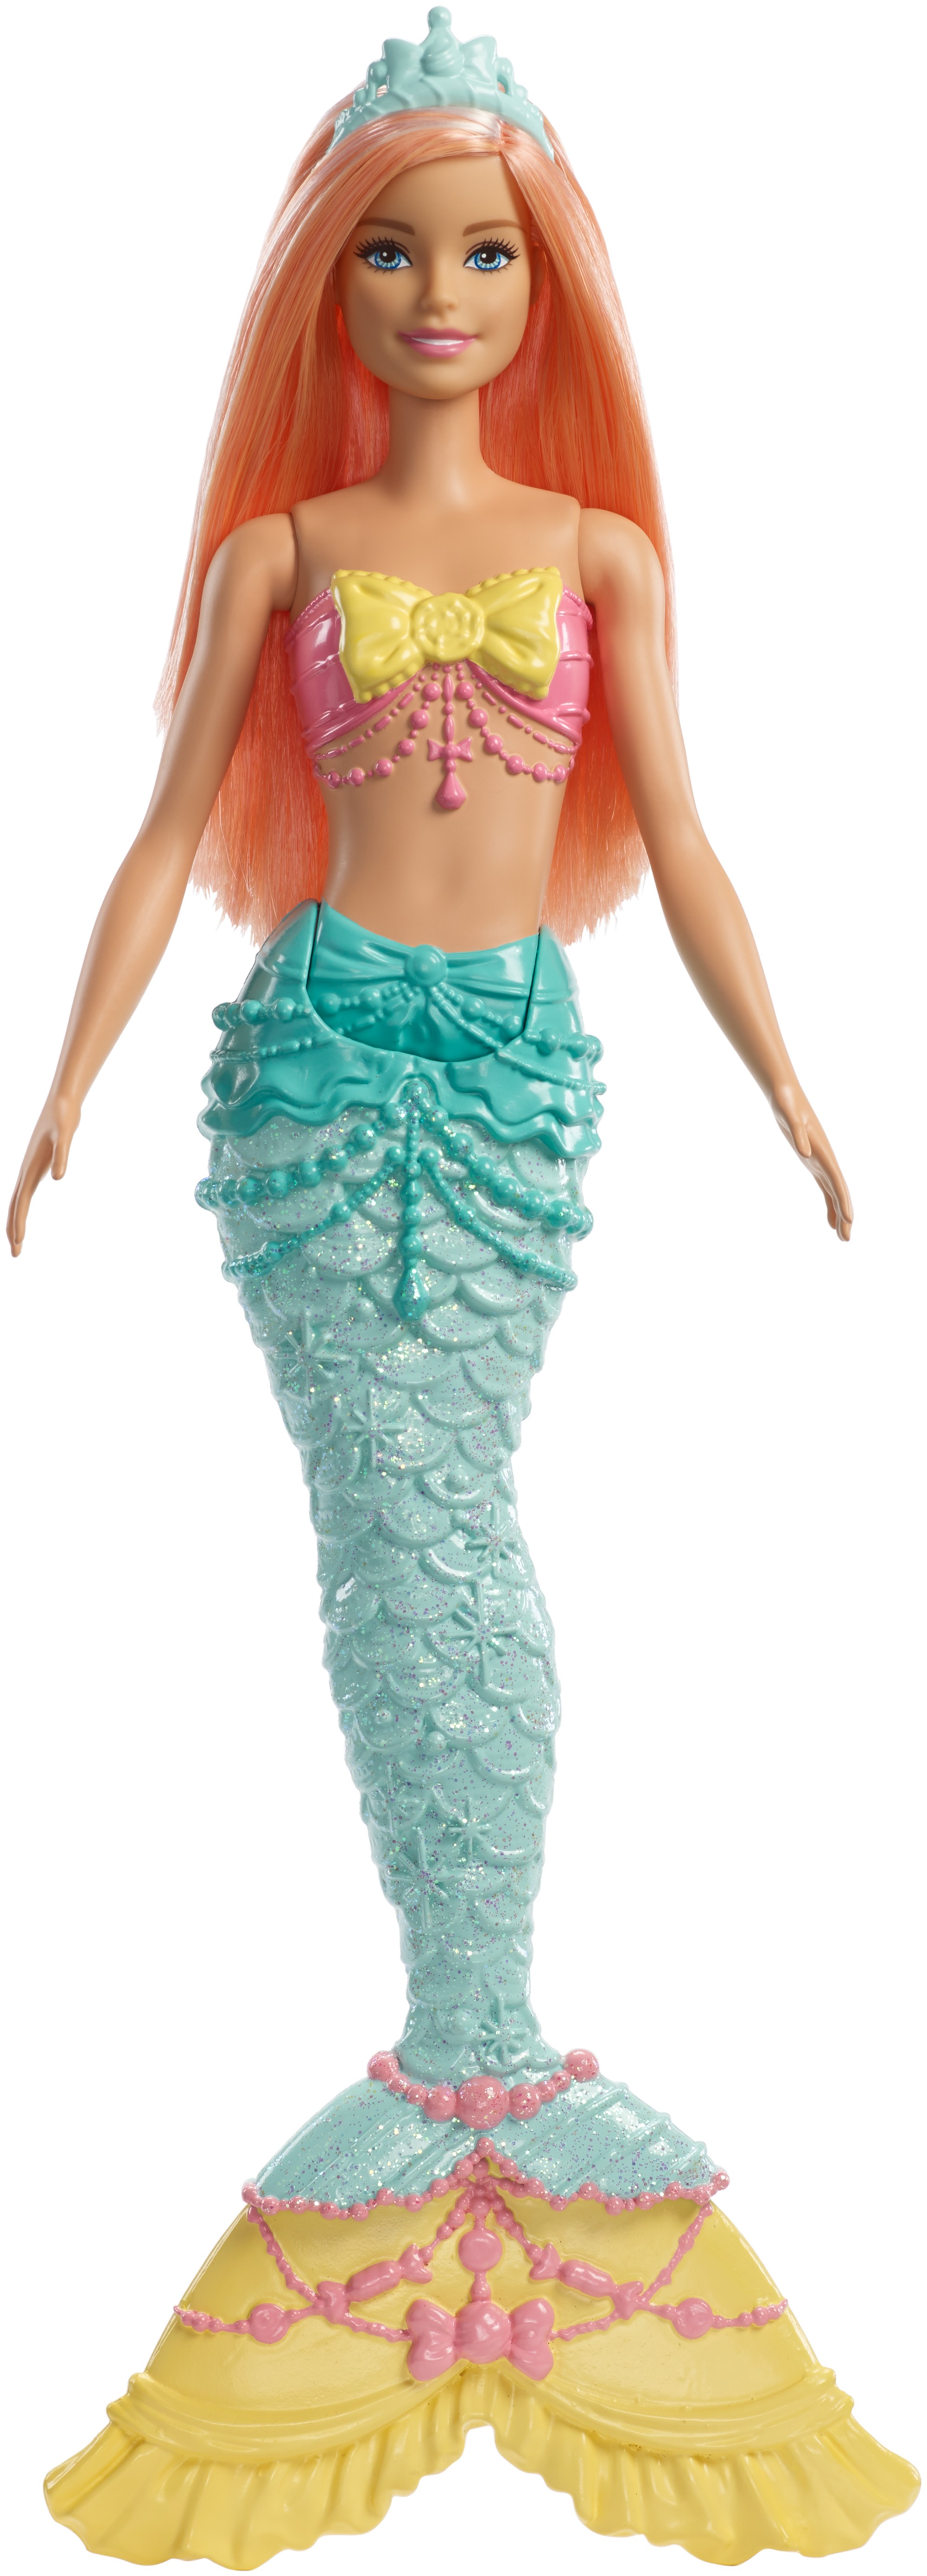 Barbie Dreamtopia Mermaid Doll with Long Coral Hair - image 1 of 8